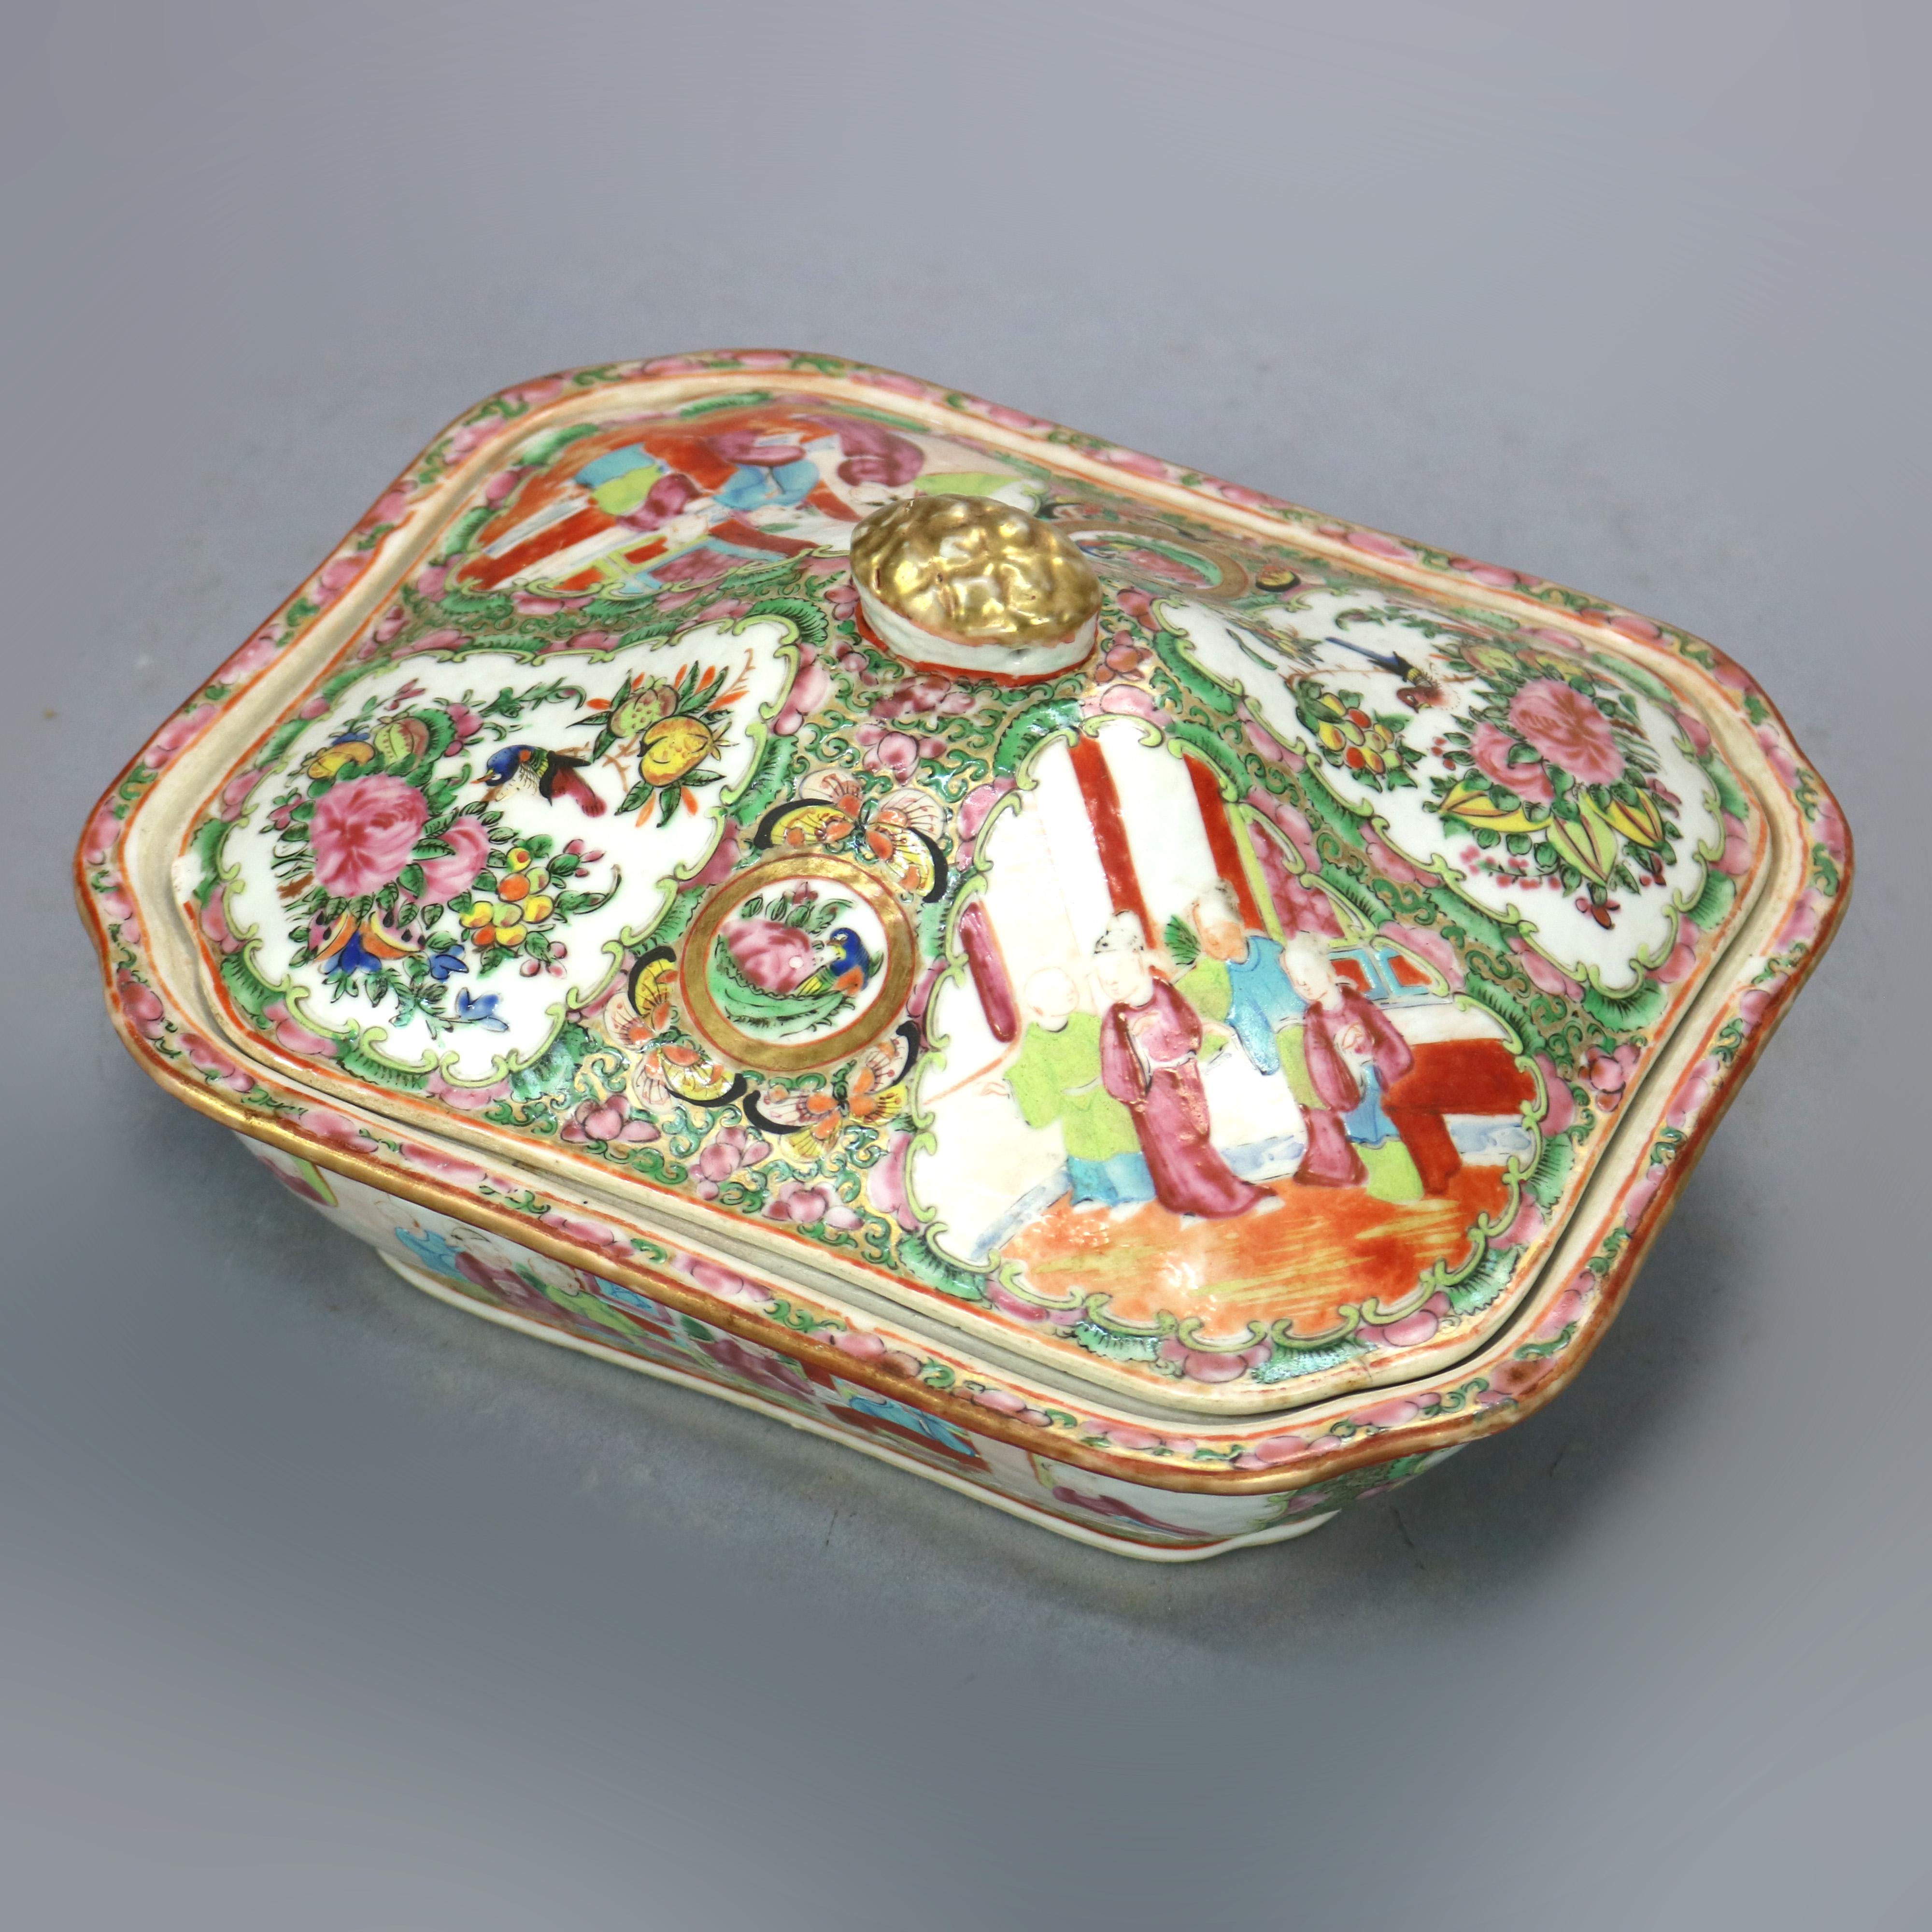 An antique Chinese rose medallion lidded tureen offers ceramic construction having exterior with hand enameled reserves with garden and genre scenes, interior allover floral decorated, 19th century.

Measures: 5.25